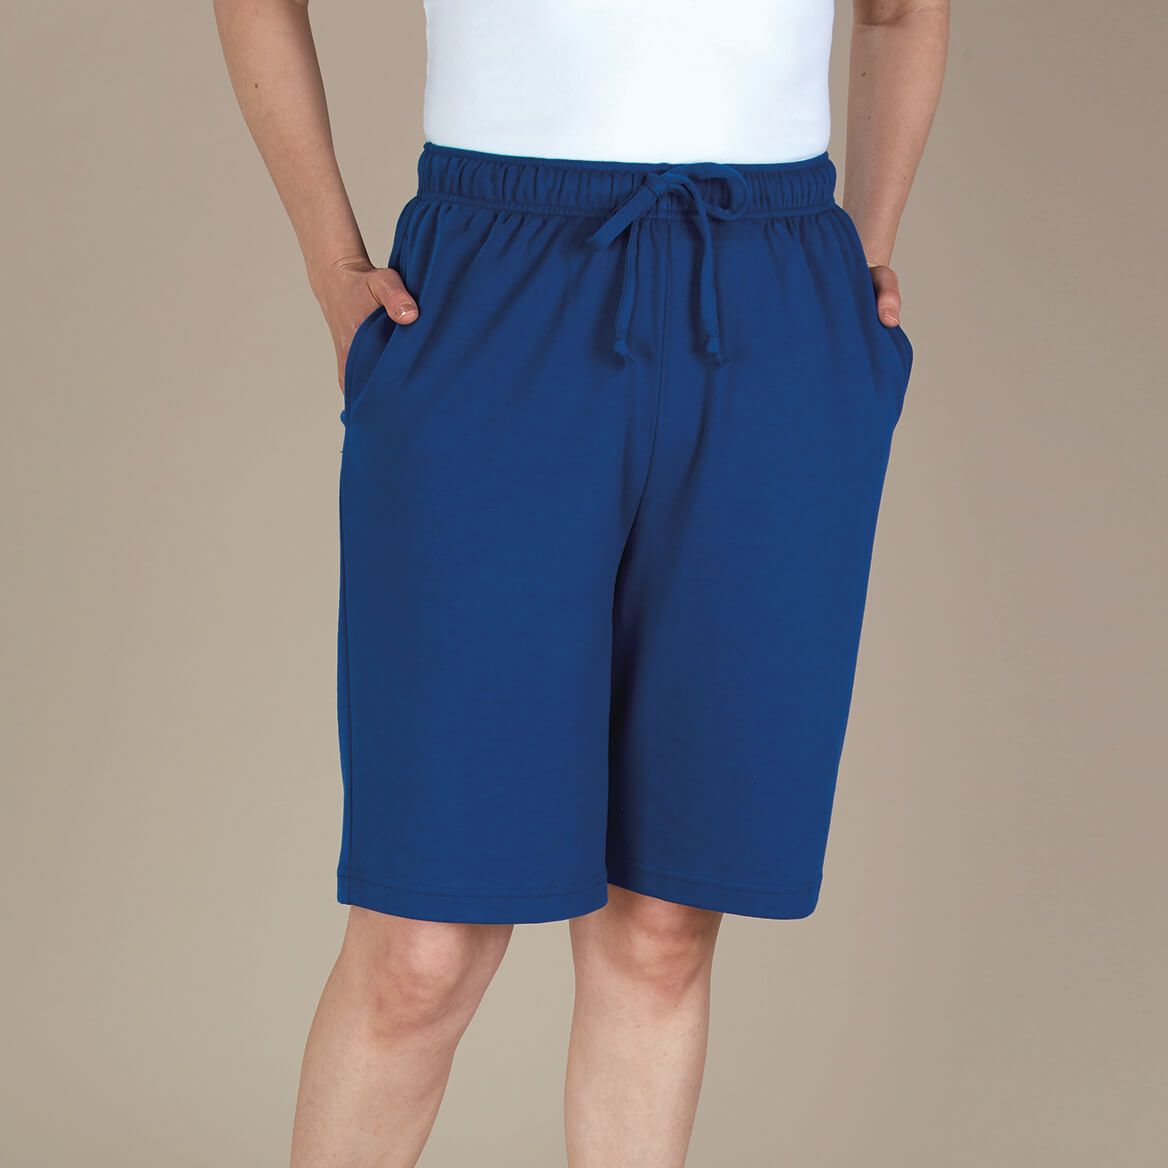 Women's Knit Pull-On Shorts + '-' + 375499